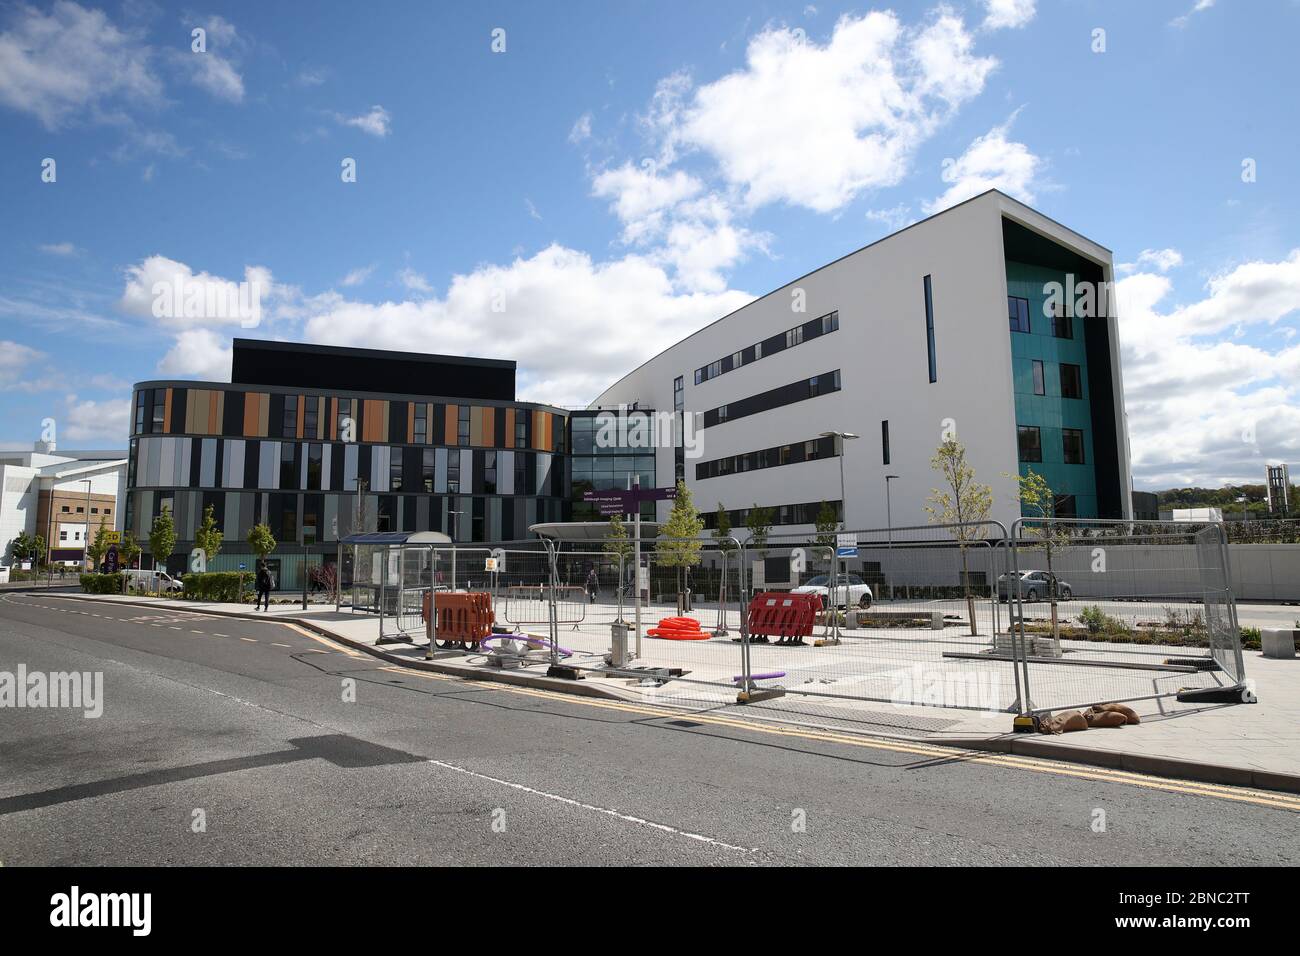 The view of the Royal Hospital for Children and Young People Edinburgh on the Little France campus. NHS Lothians' Department of Clinical Neurosciences (DCN) has been transferred into a purpose-built new home on the Little France campus in Edinburgh. Stock Photo